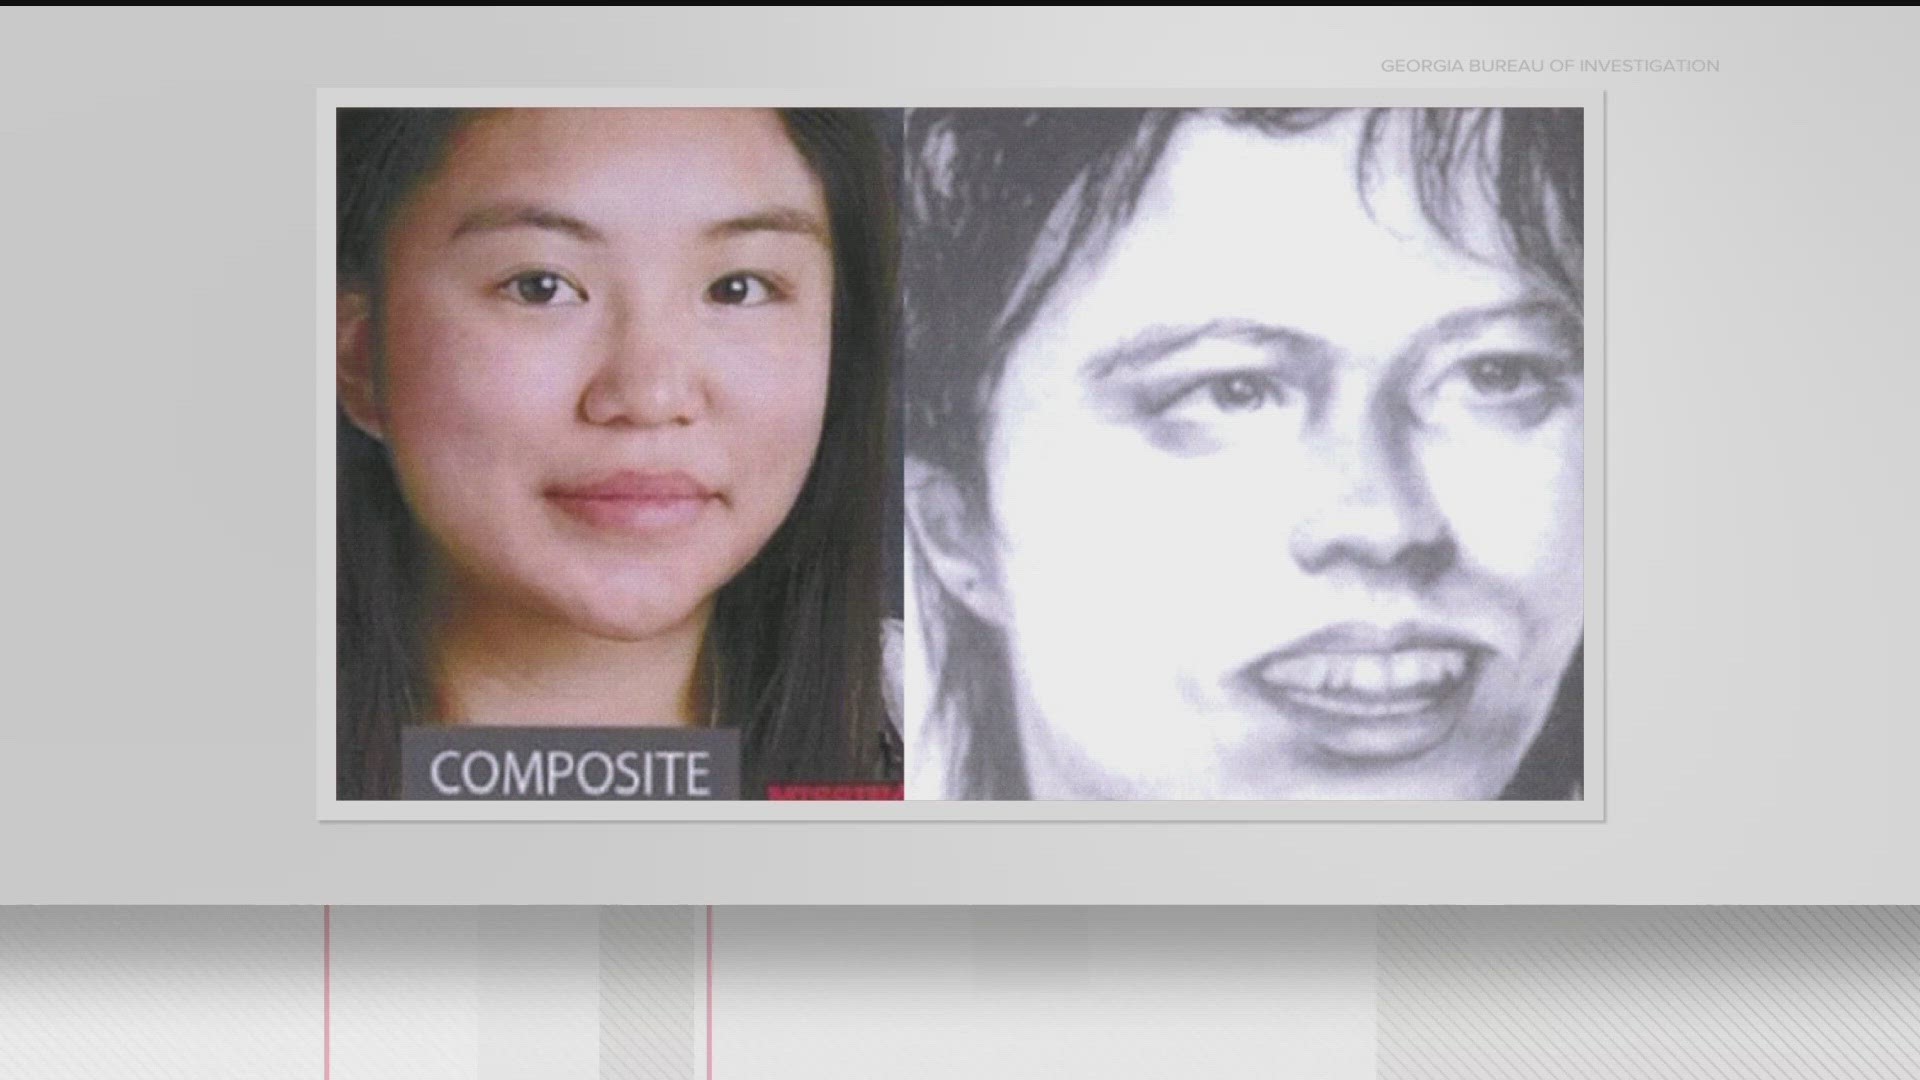 Chong Un Kim was recently identified with DNA technology that helped find her family. Kim was only 26 when her remains were found.